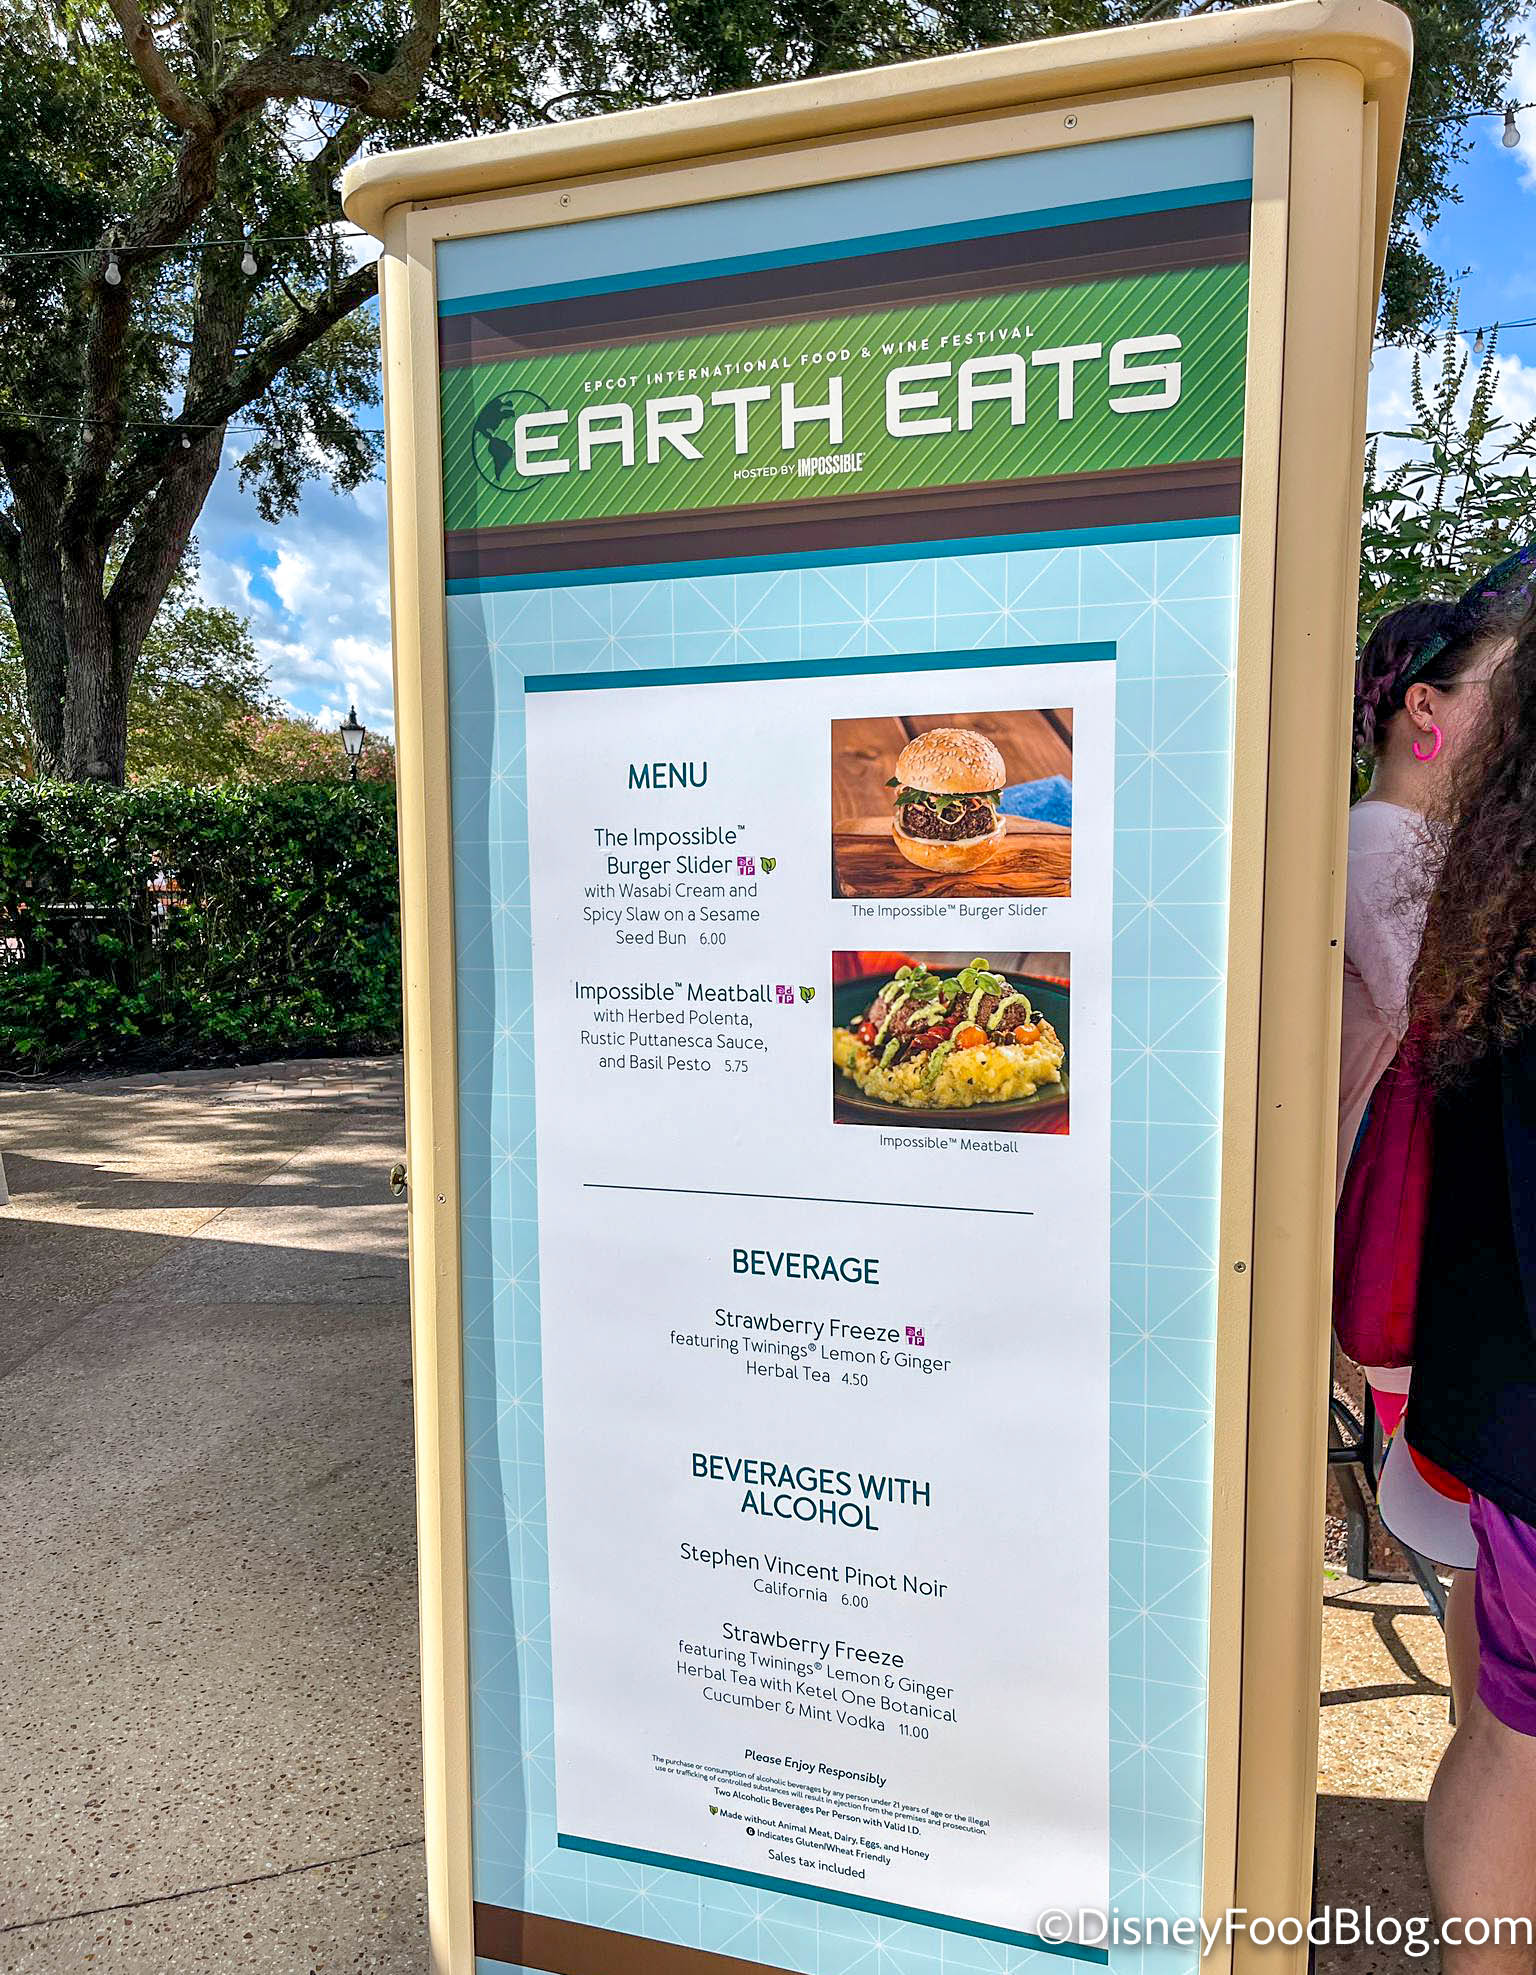 Disney Didn't Have to Go THIS HARD on this EPCOT Food & Wine Festival